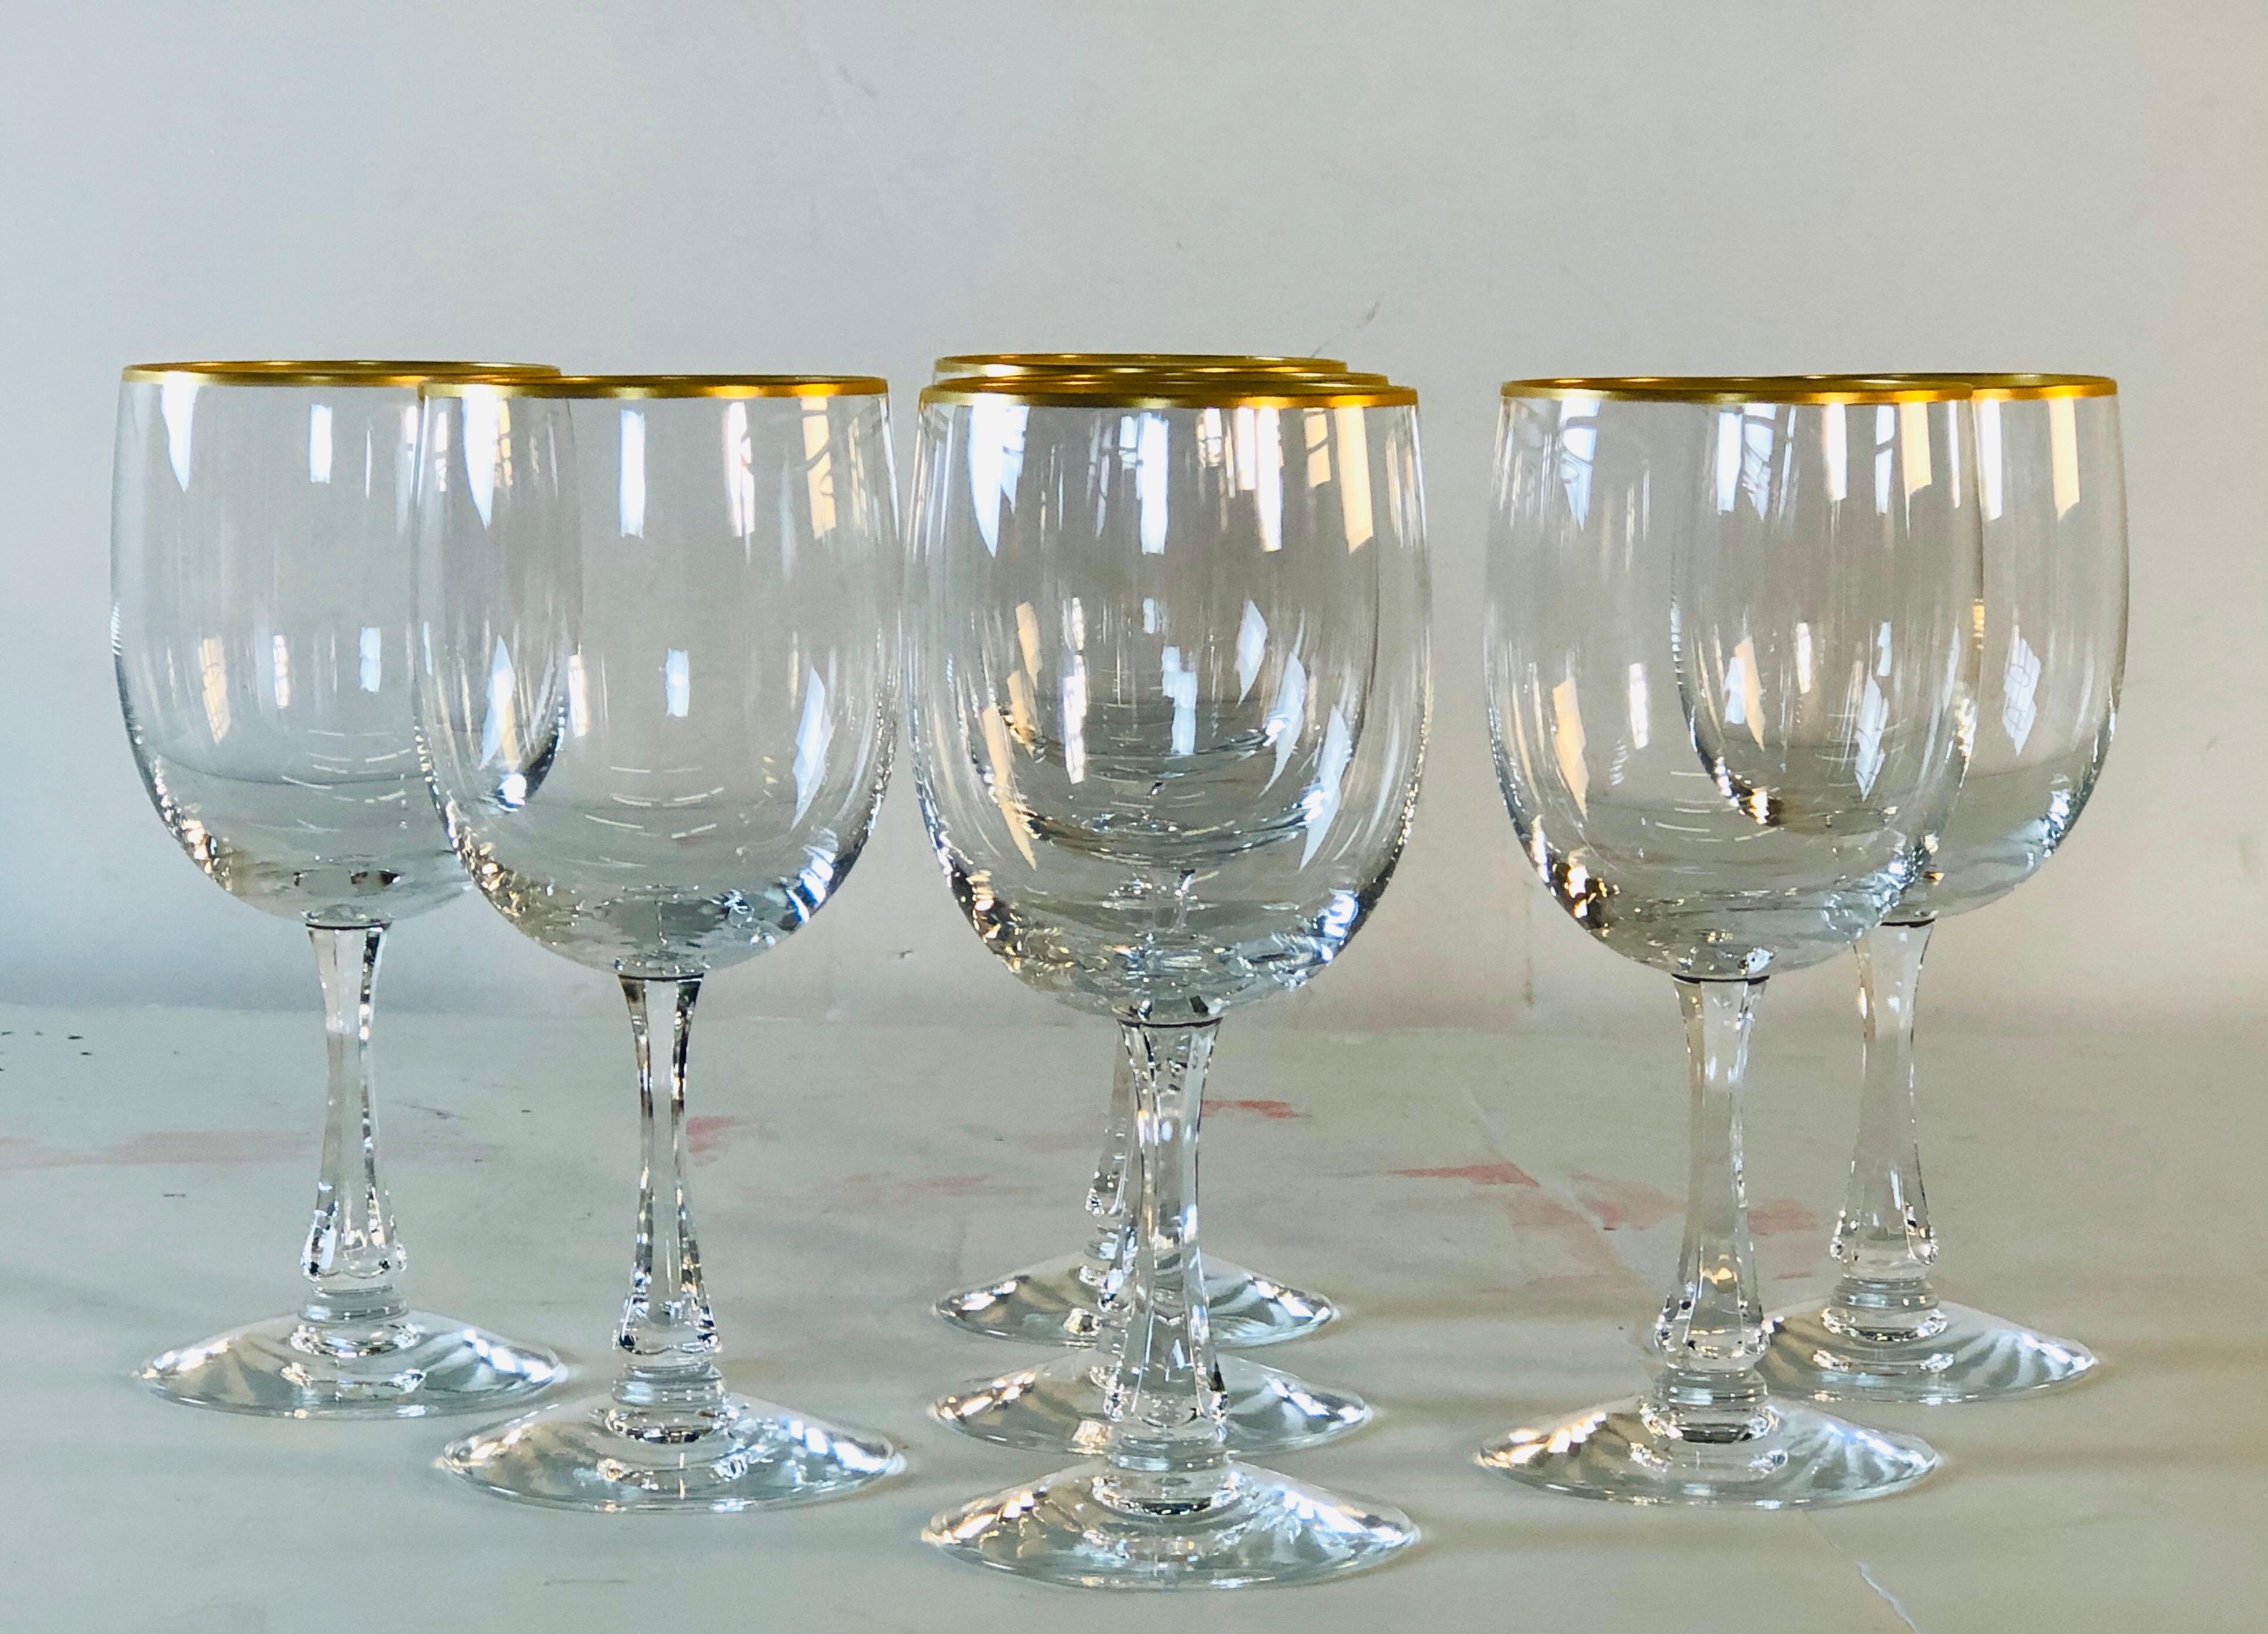 Vintage 1960s set of 7 Fostoria Glass gold rim water or wine glass stems. Marked underneath. Excellent condition.
            